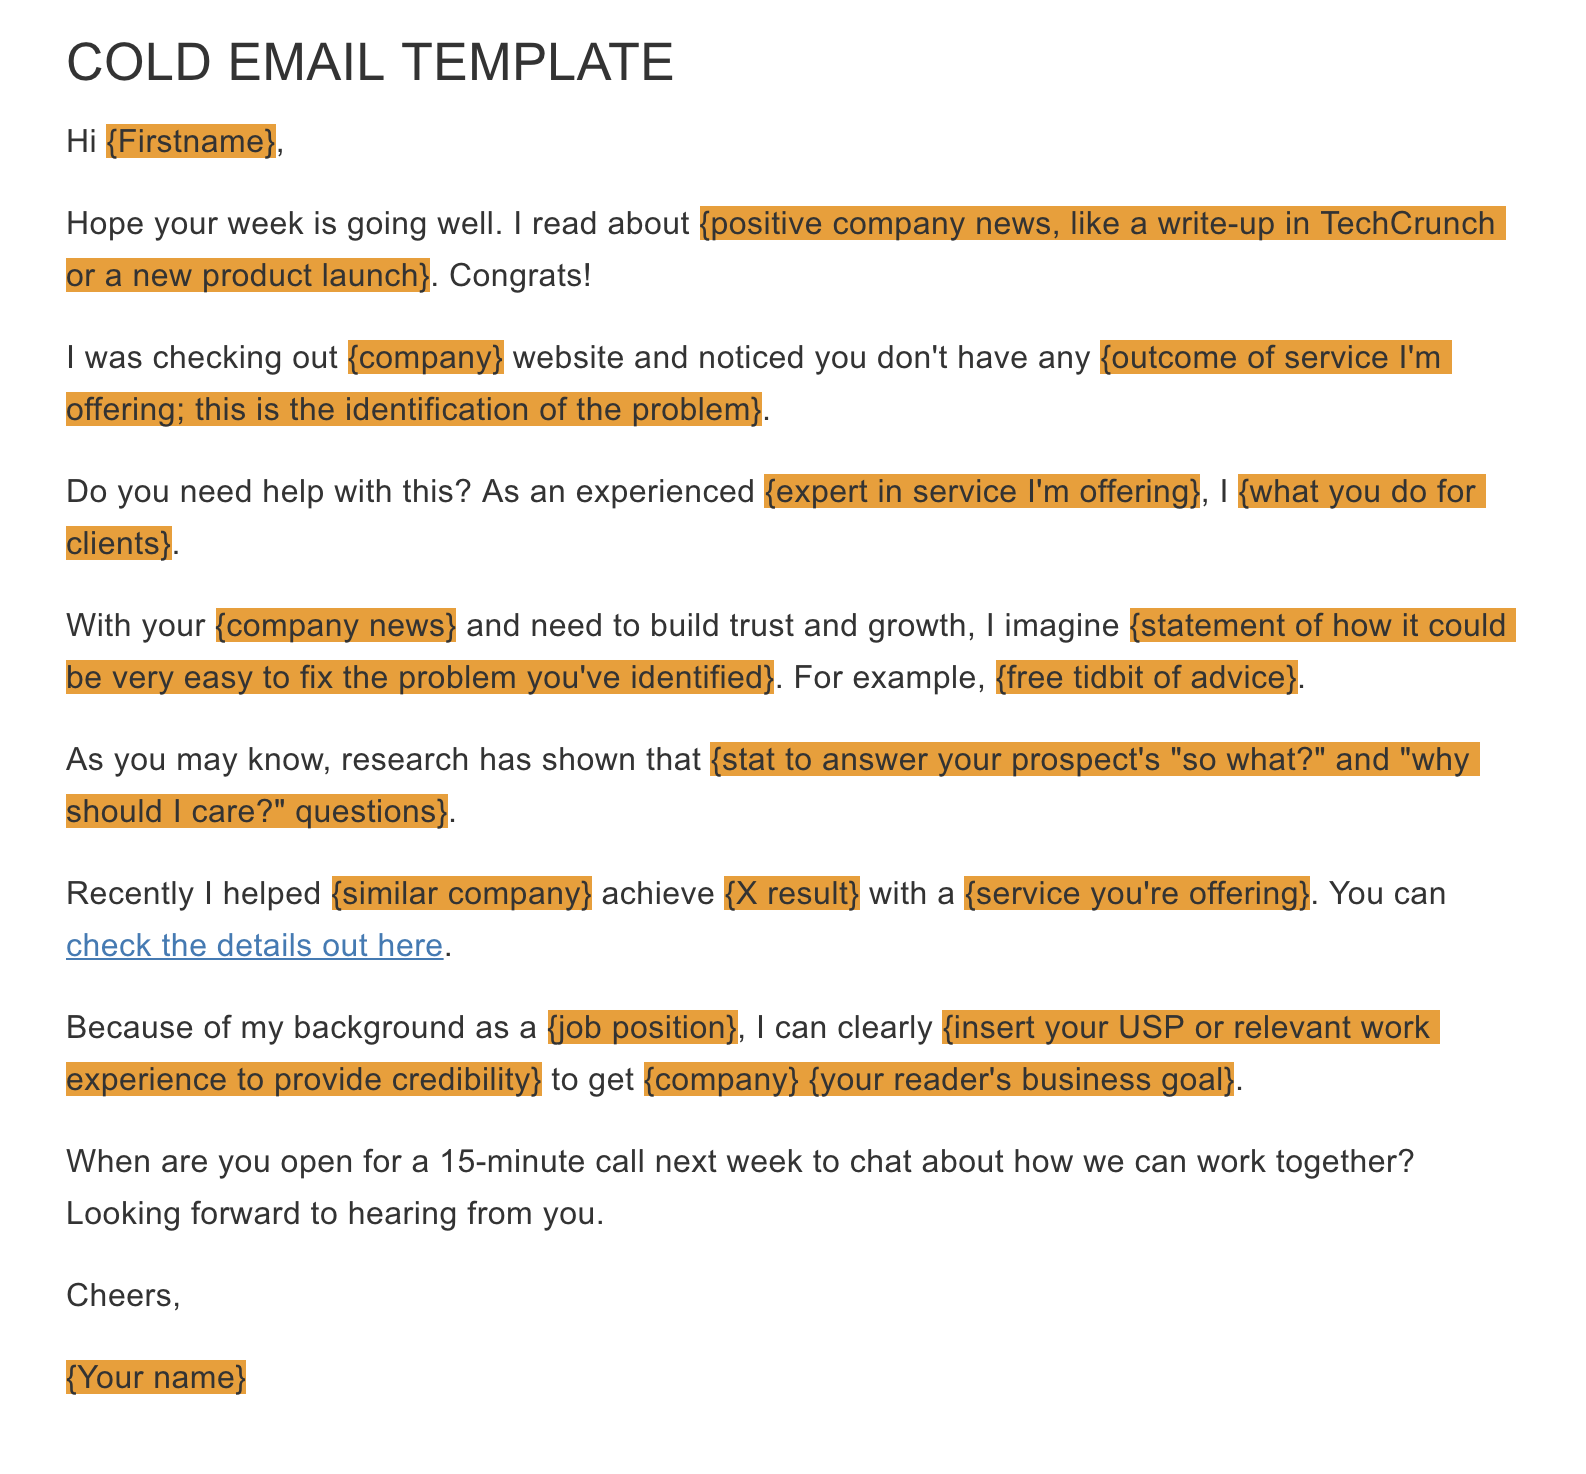 Freelance Cold Email Template